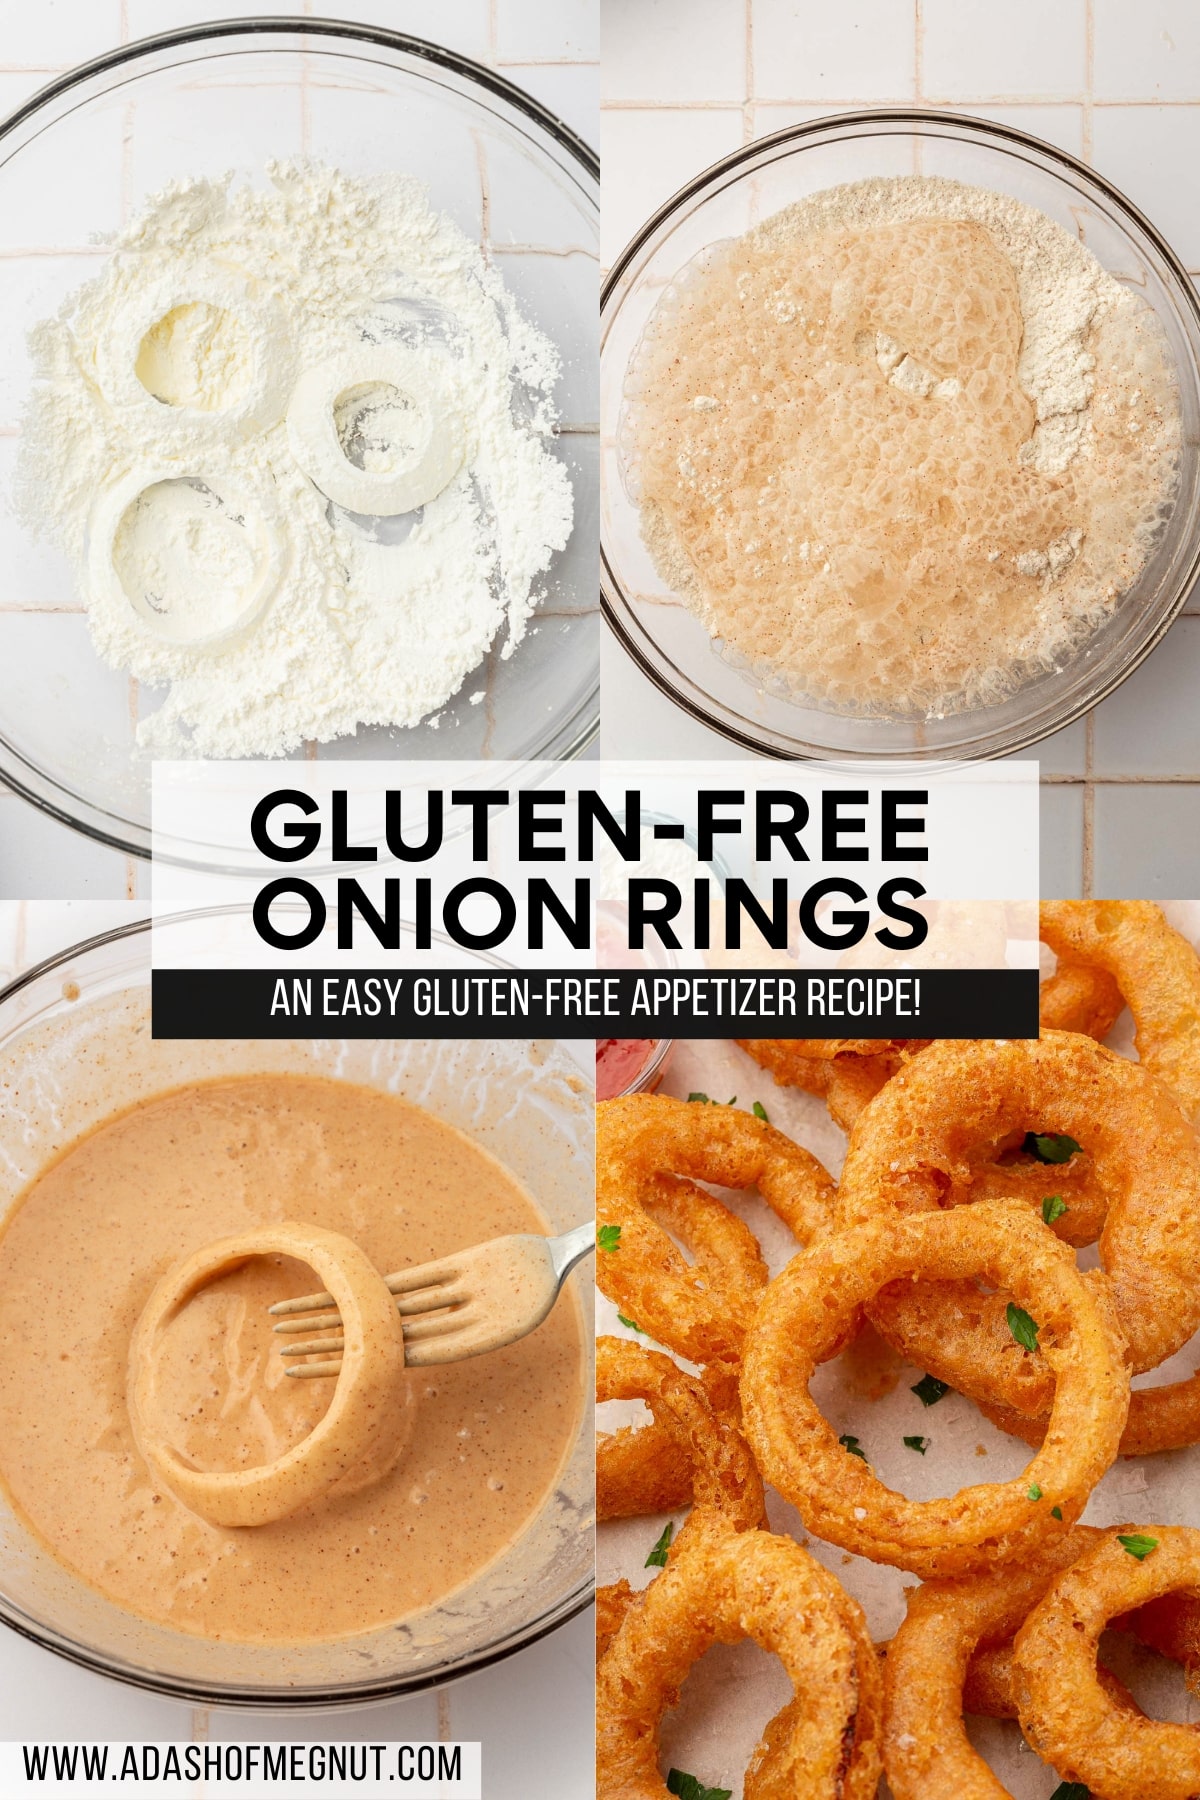 A four photo collage showing the process of making gluten free onion rings. Photo 1: A glass mixing bowl with cornstarch and three raw onion rings. Photo 2: A gluten-free flour blend in a mixing bowl topped with club soda that has started to bubble up. Photo 3: A fork dipping a single onion ring into gluten-free batter. Photo 4: Gluten-free onion rings on a baking sheet.